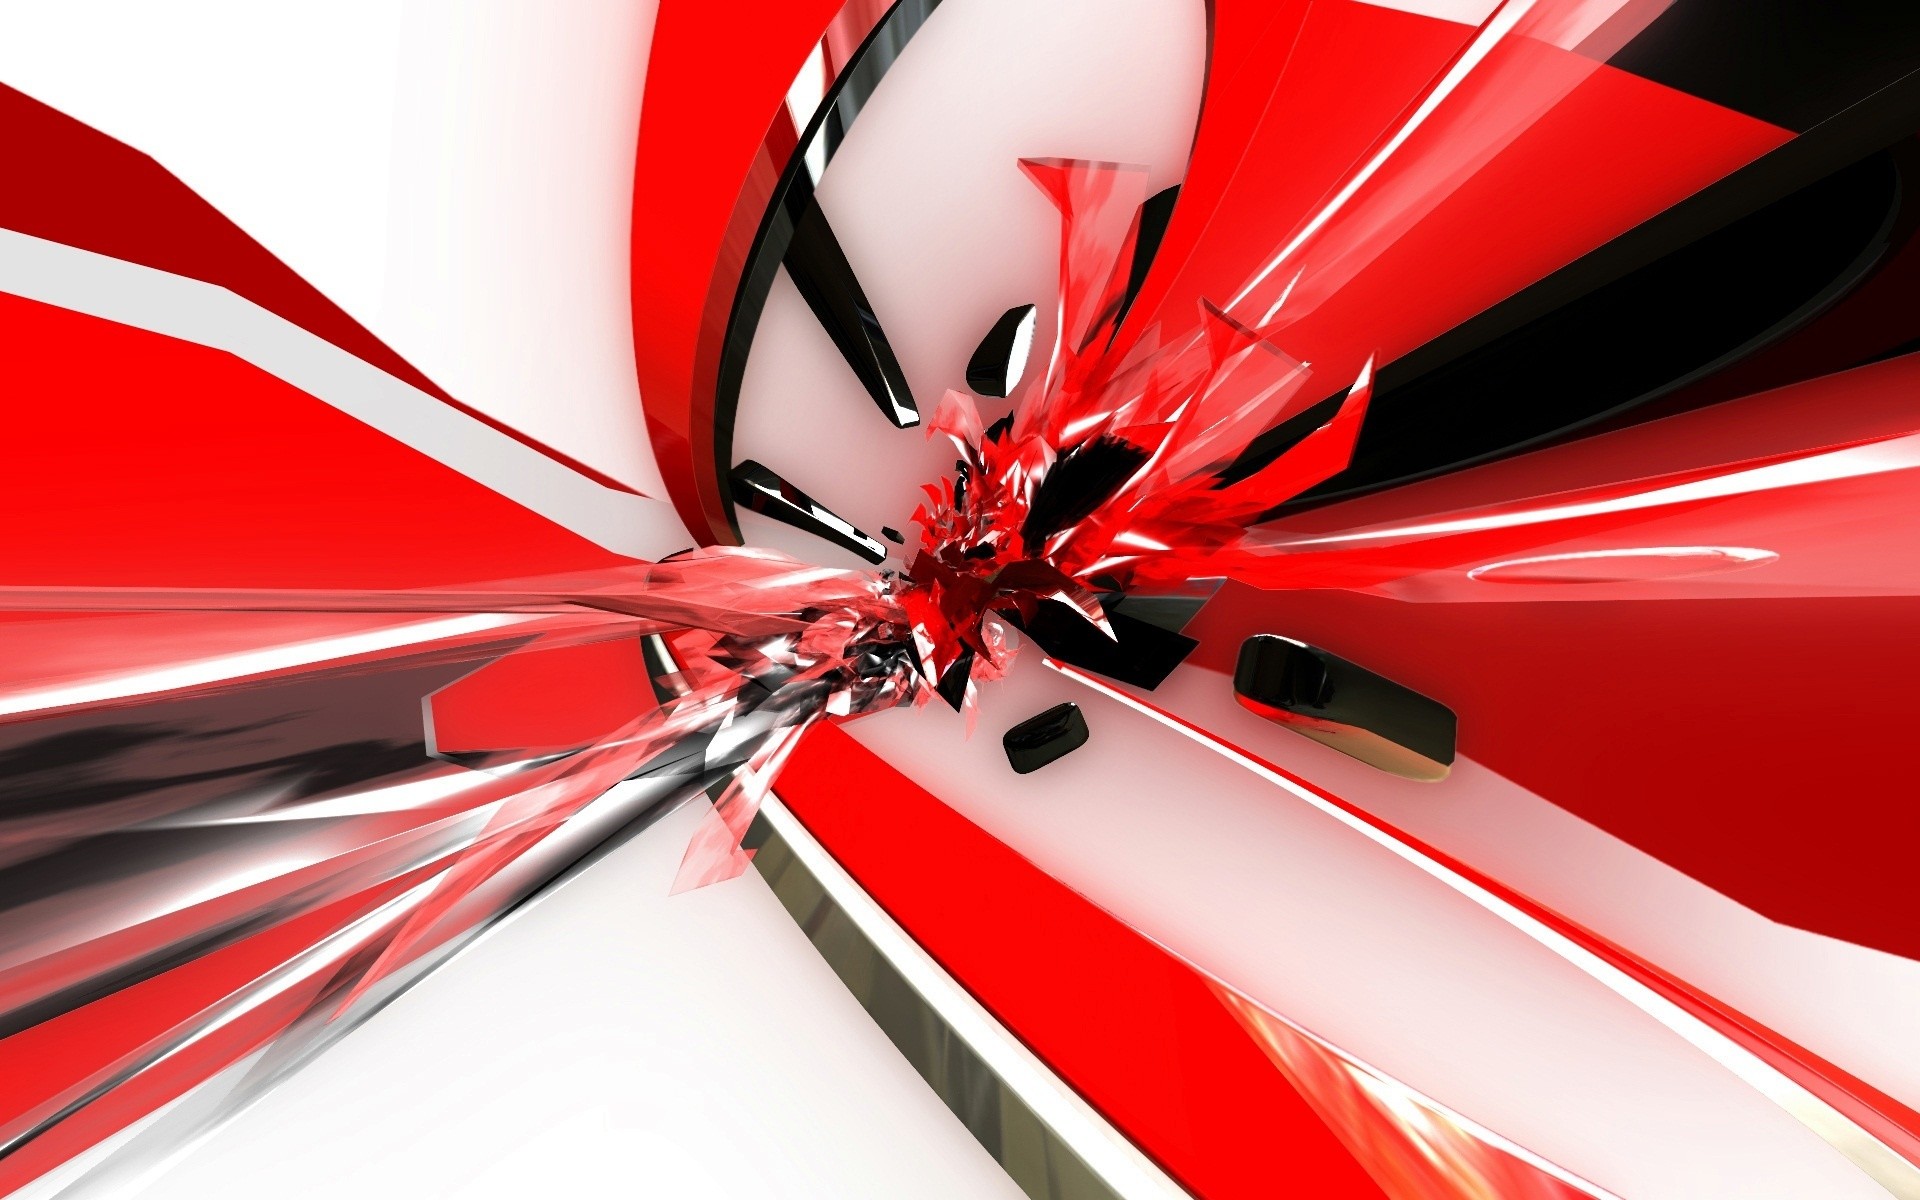 1920x1200 Hd Red Abstract Wallpapers Red Abstract Hd Wallpaper